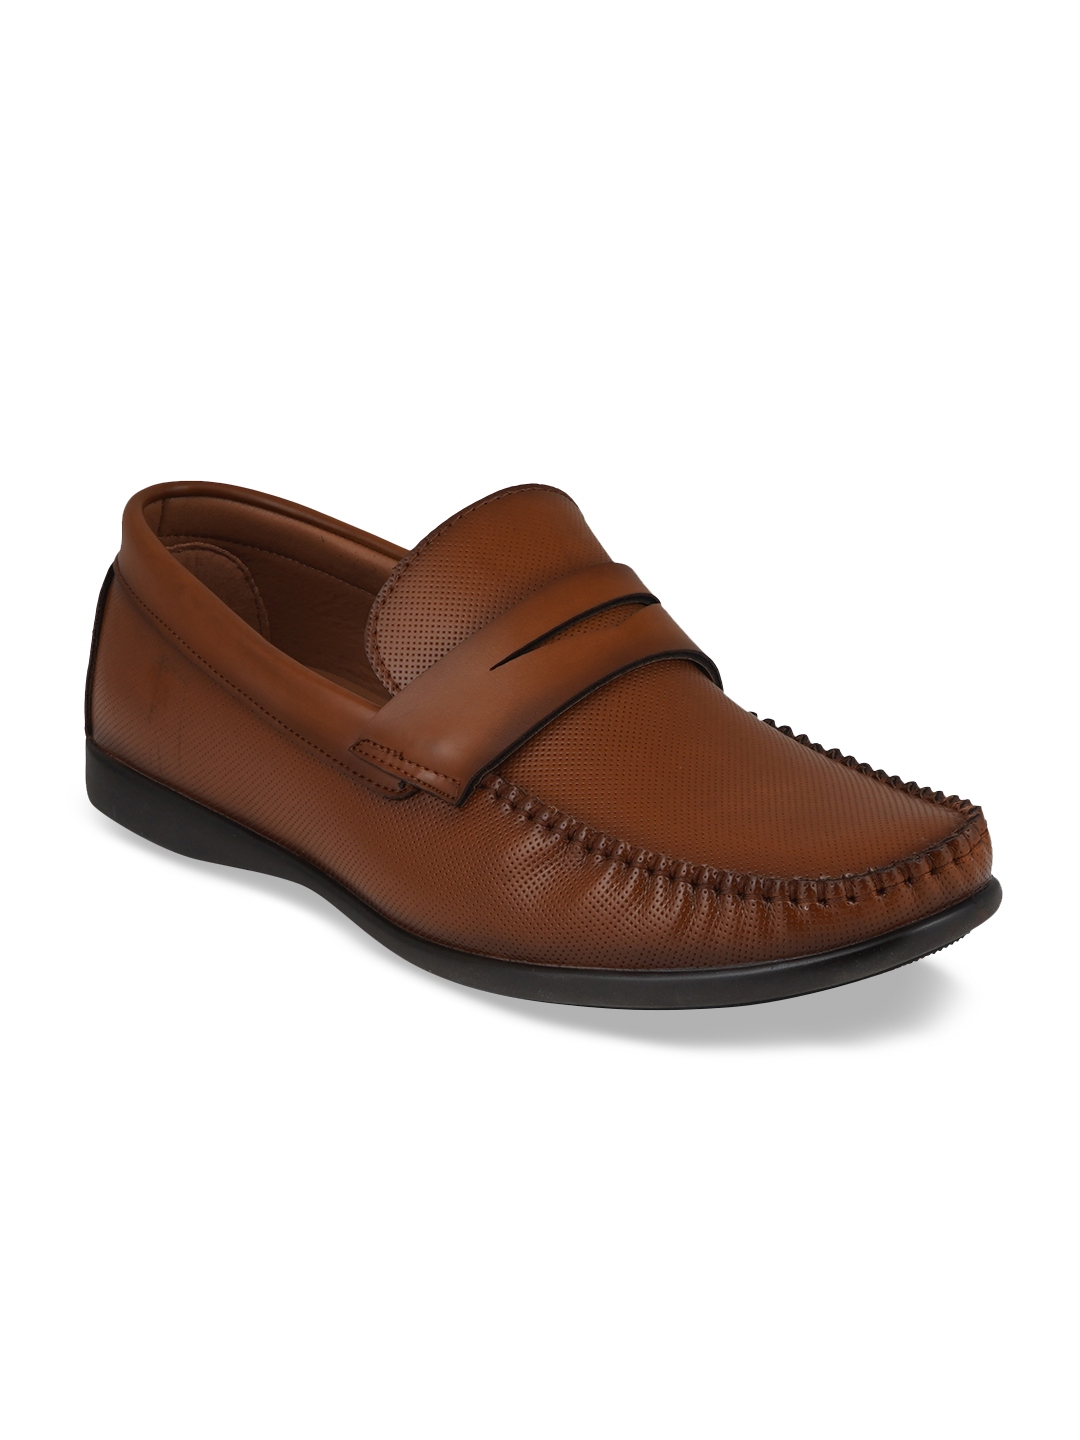 Buy Pelle Albero Men Brown Loafers - Casual Shoes for Men 11104050 | Myntra